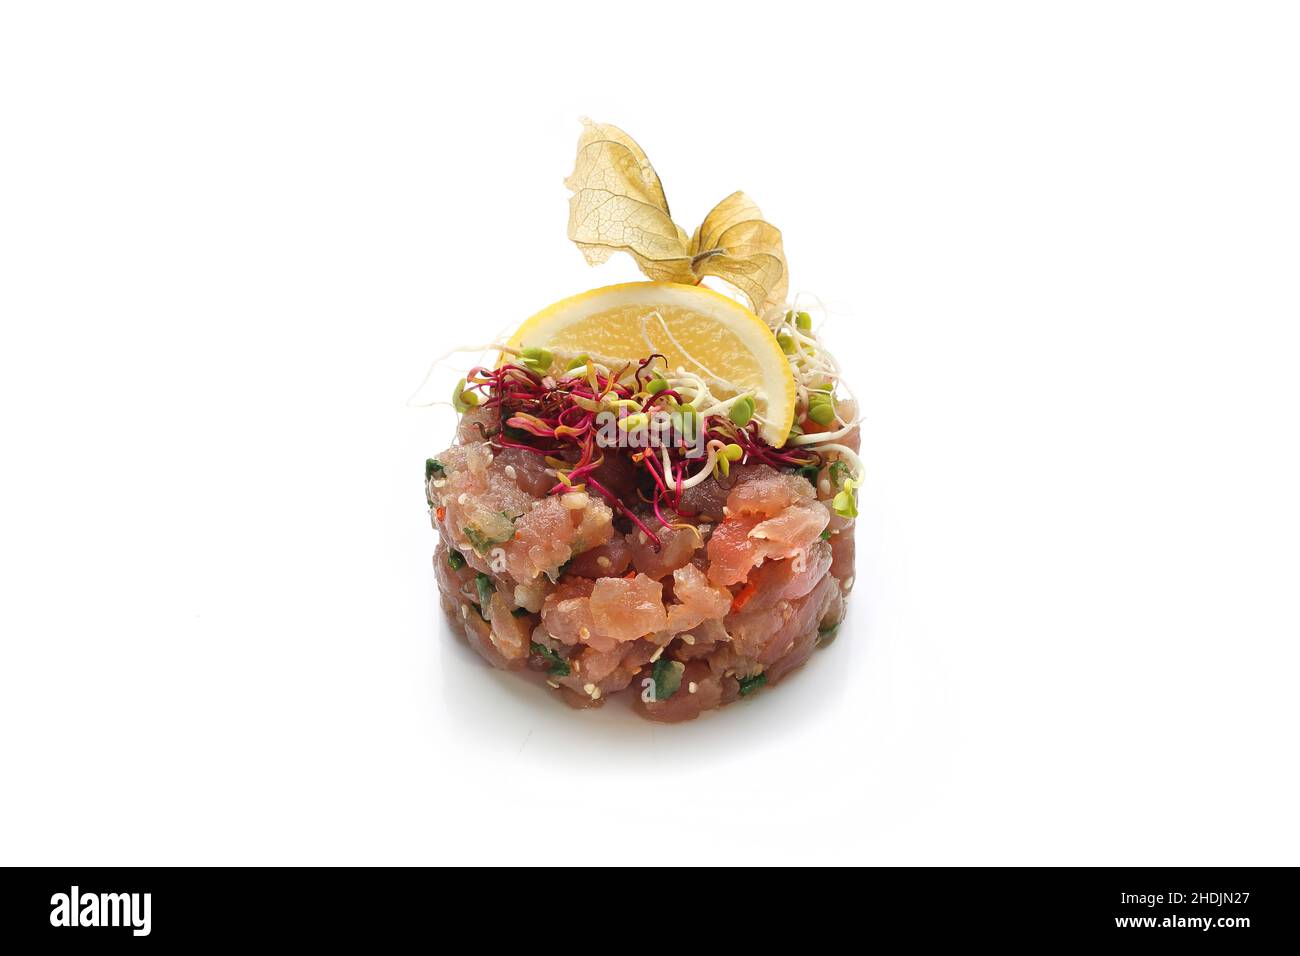 Salmon tartare. Chopped salad with fresh fish and vegetables. Traditional Japanese dish on a white background. Stock Photo